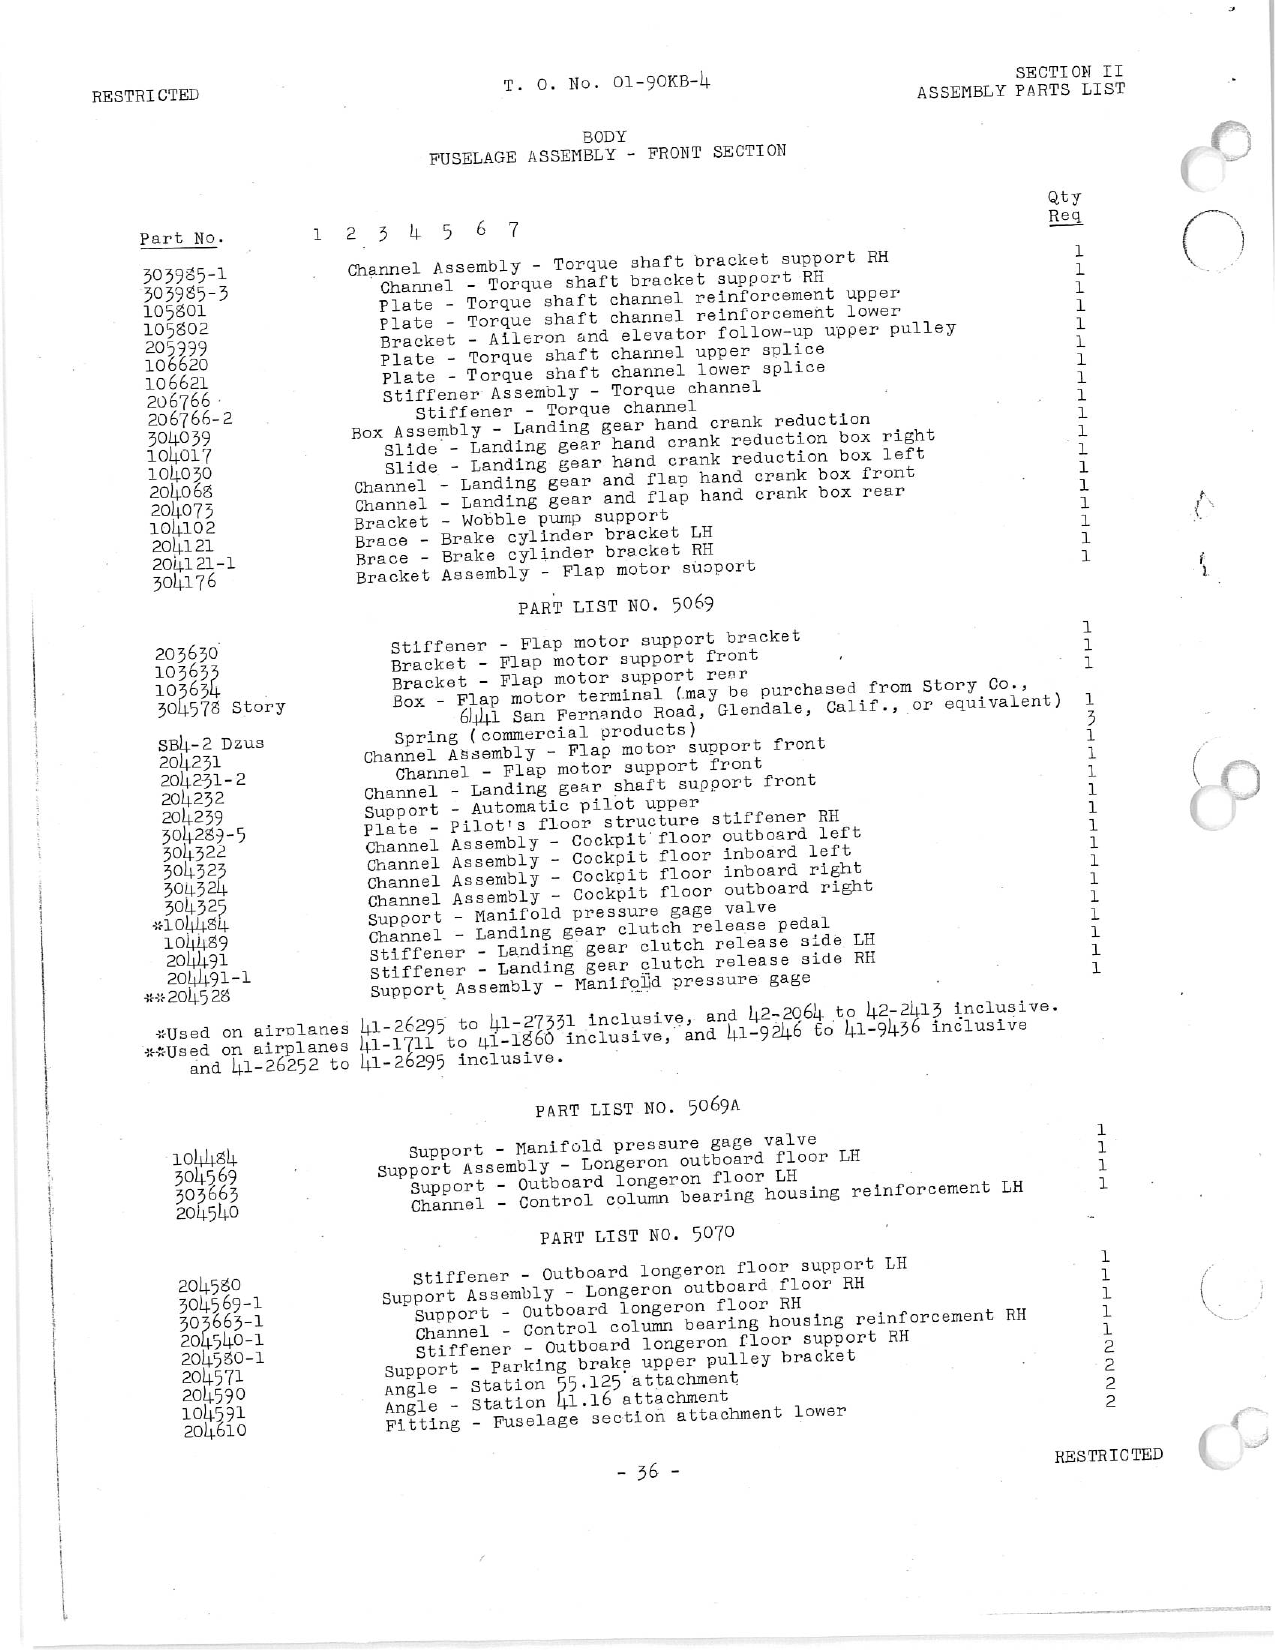 Sample page 39 from AirCorps Library document: Parts Catalog: AT-10